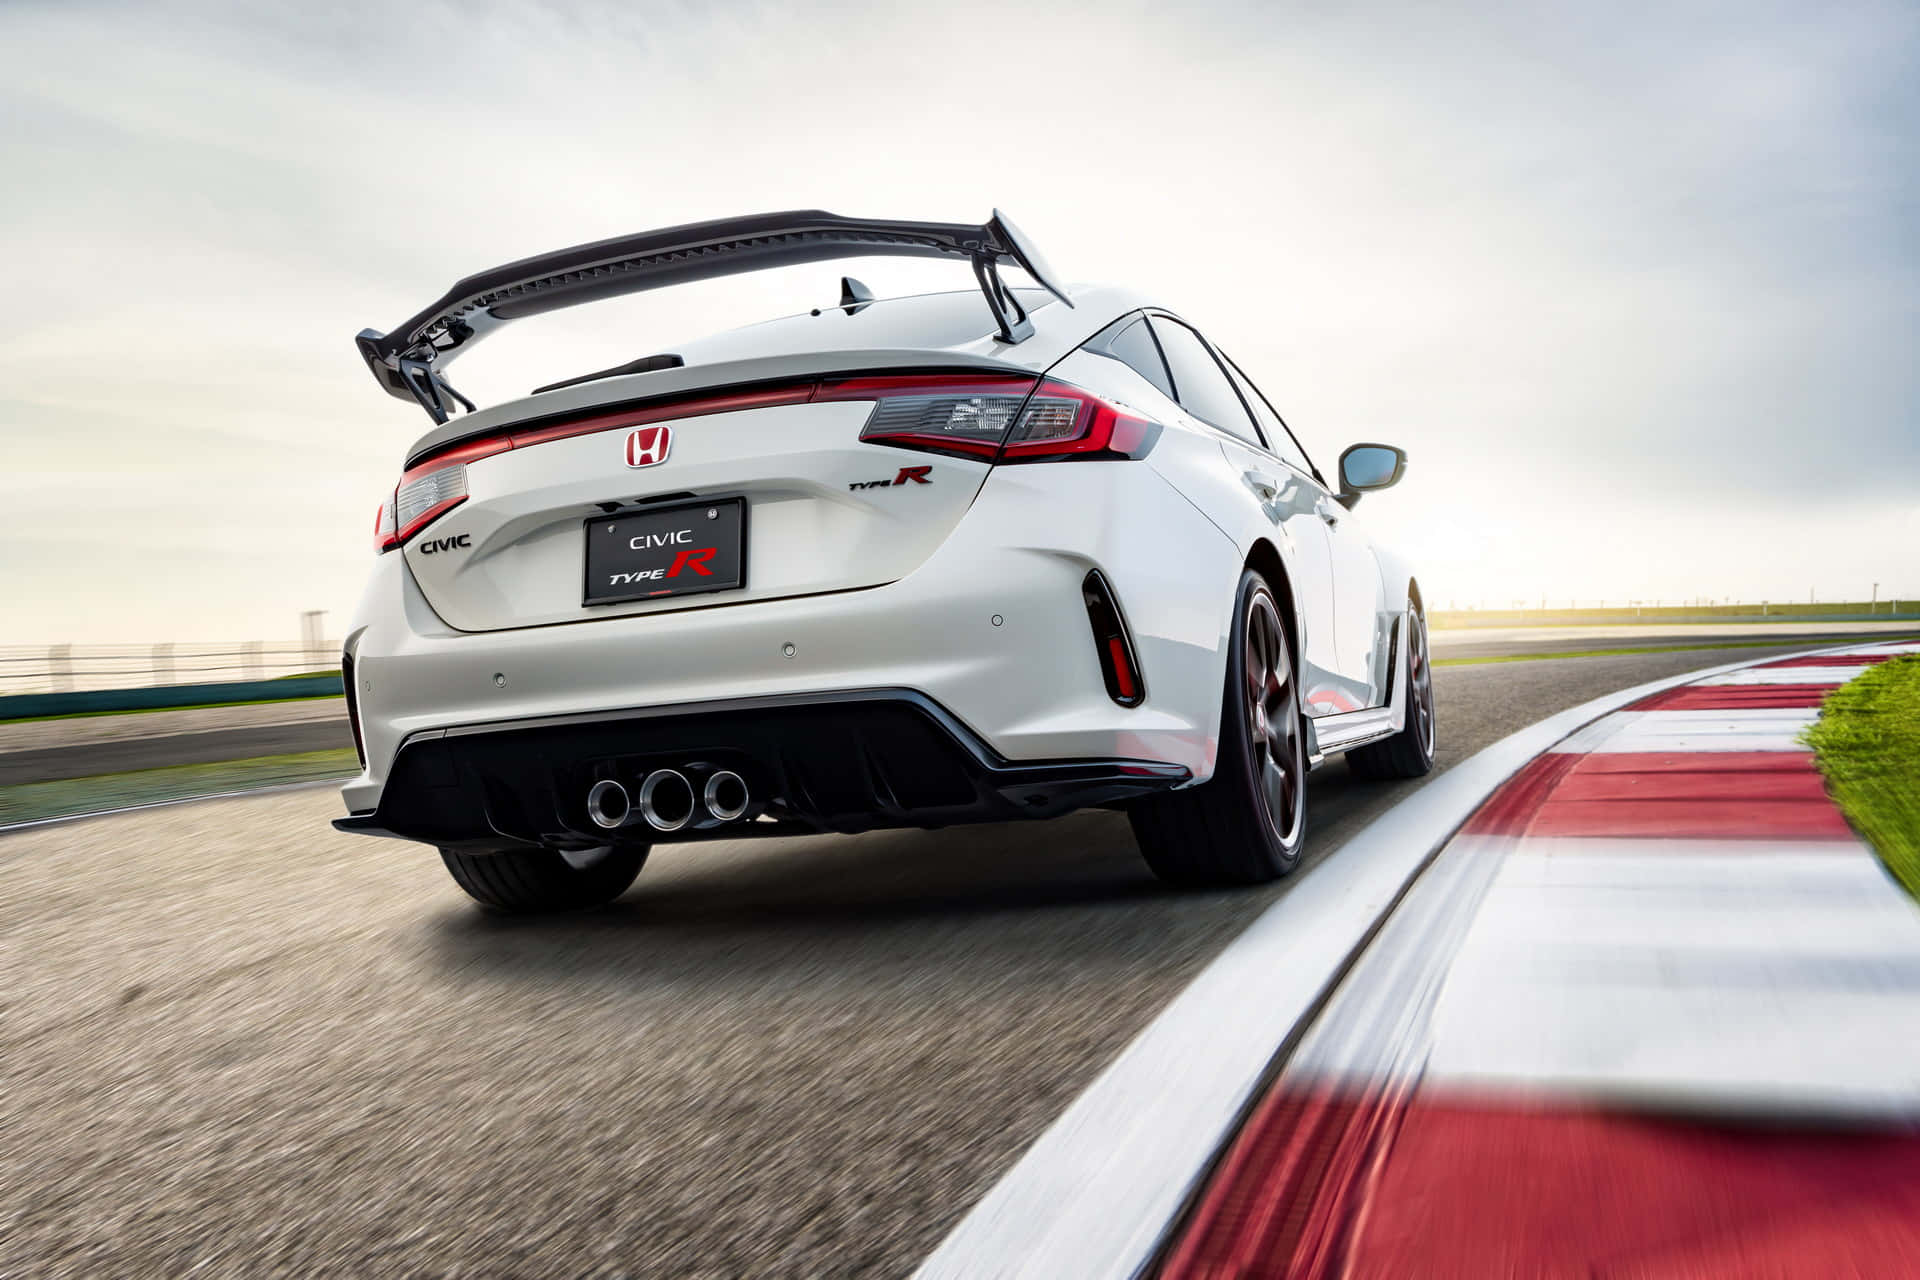 The 2019 Honda Civic Type R Is Driving On A Race Track Wallpaper